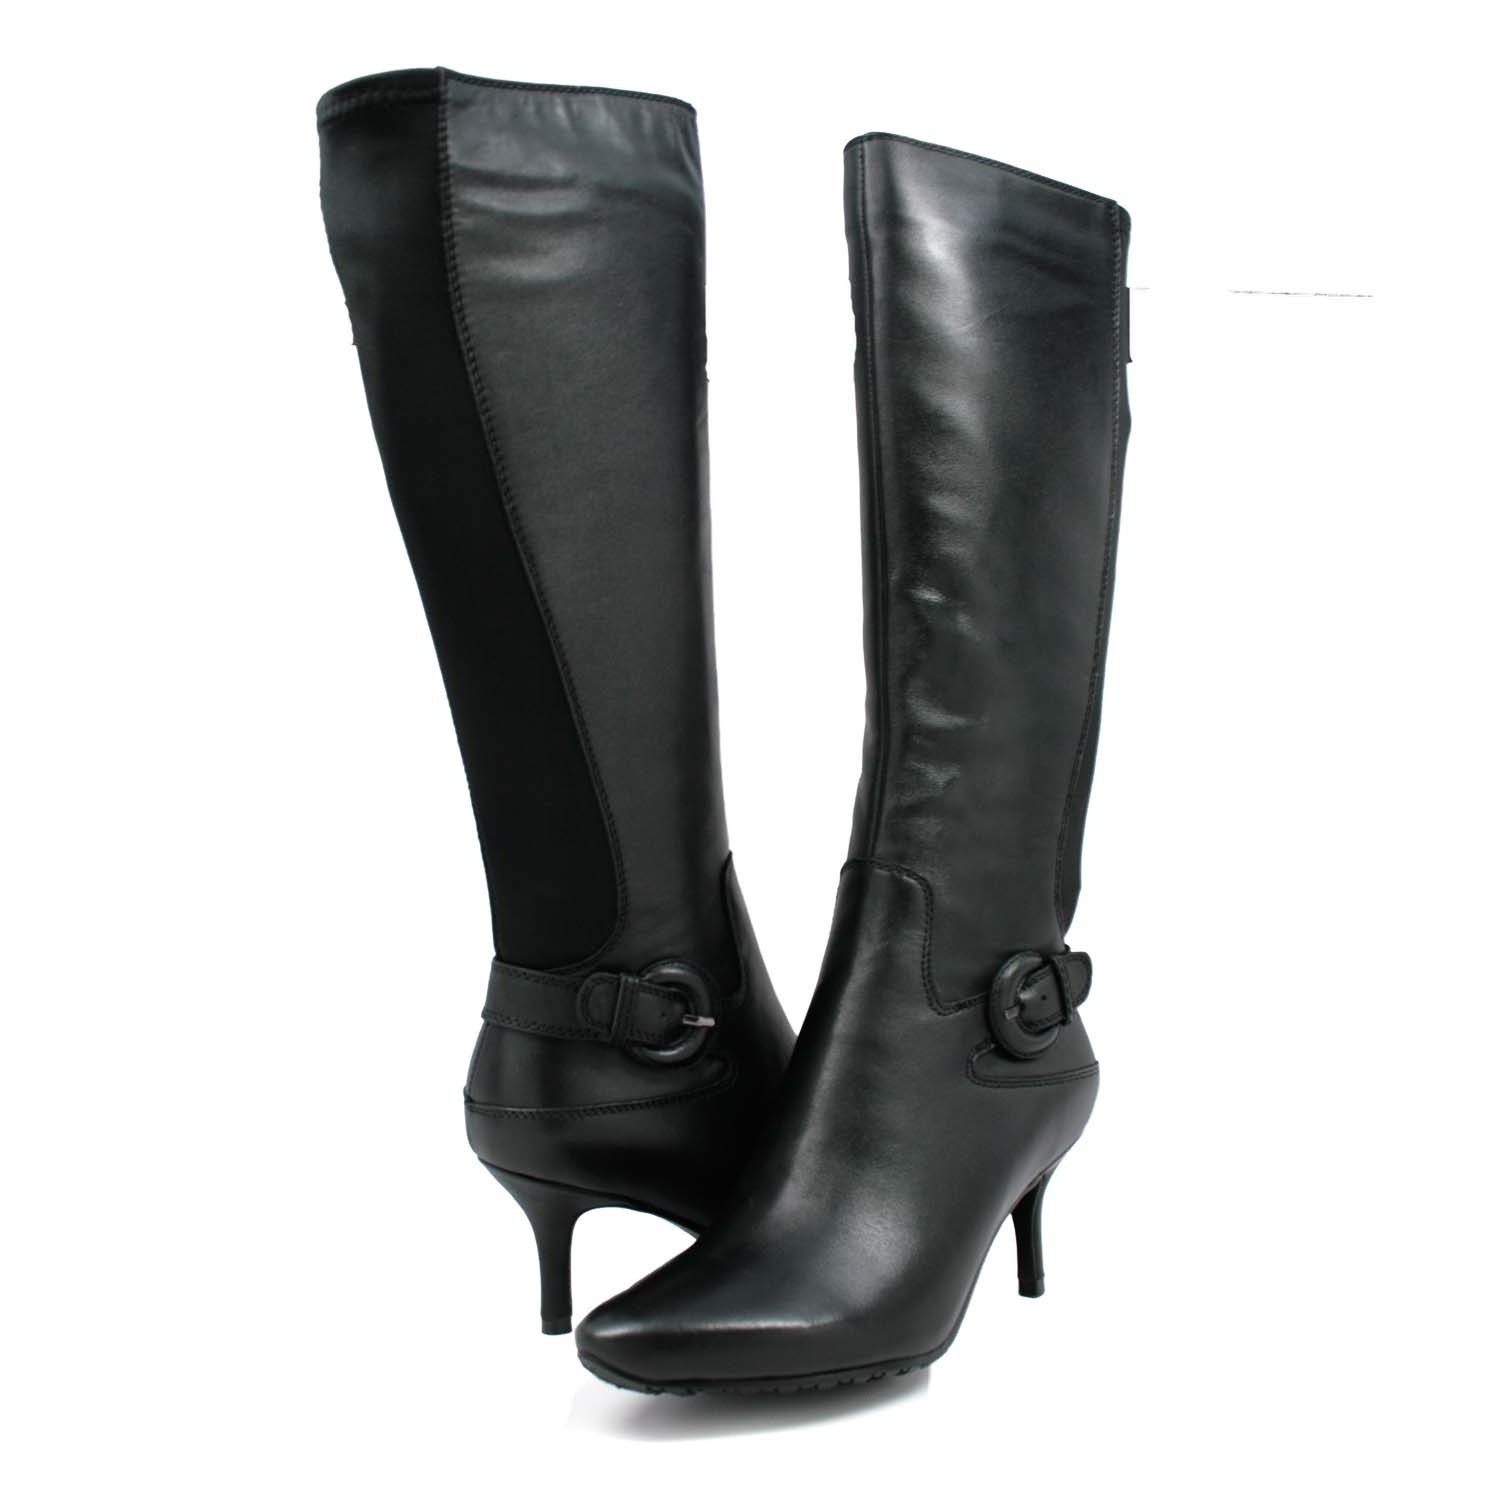 narrow calf black leather boots